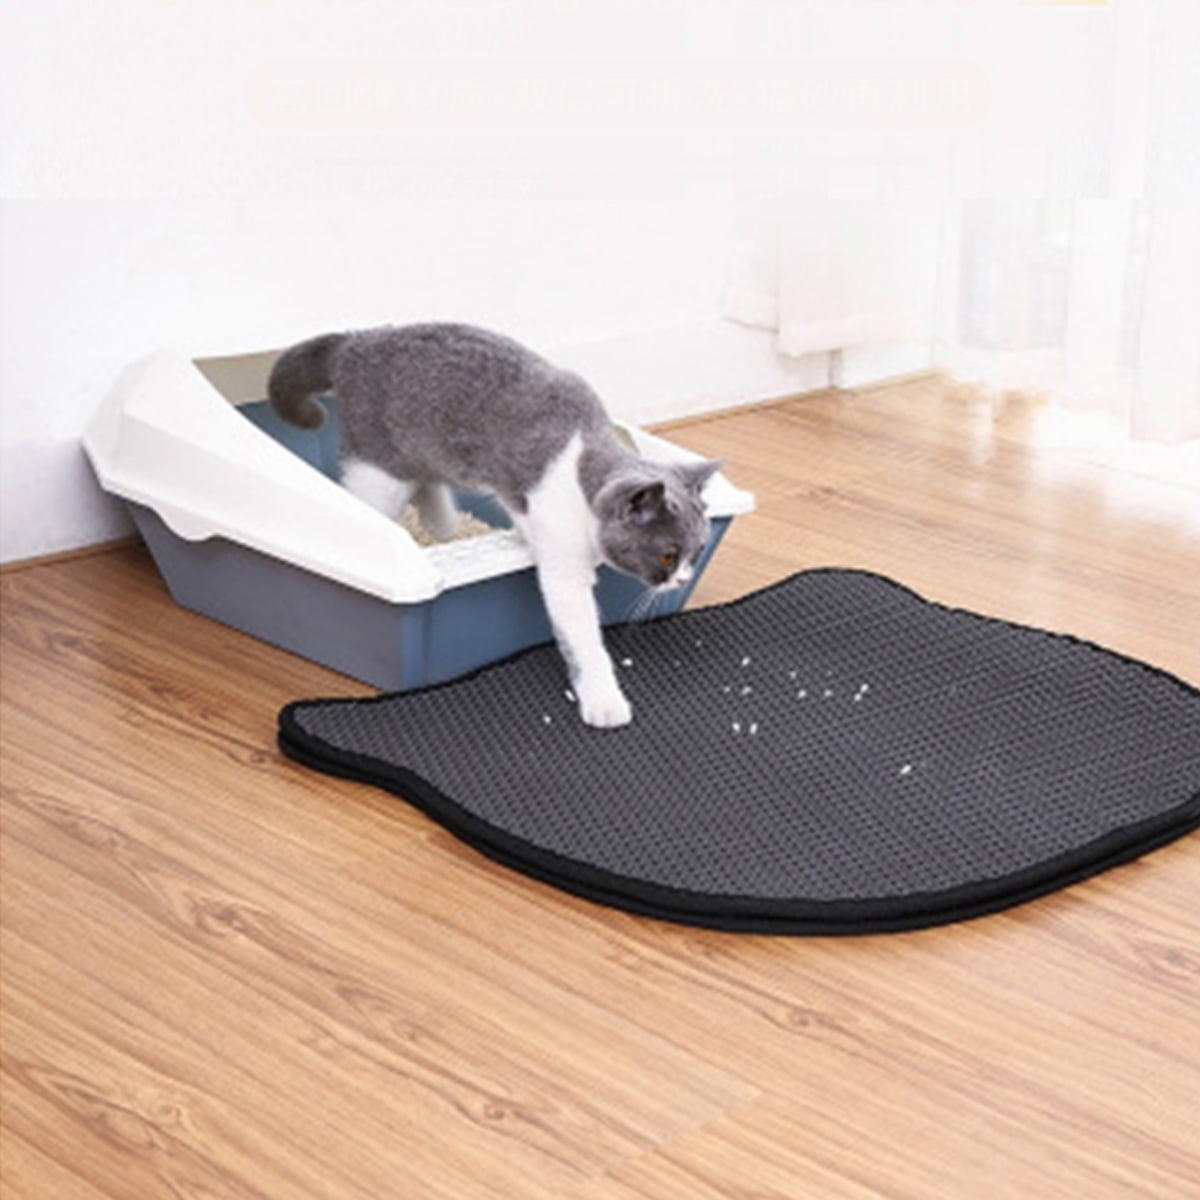 for Litter Boxes Easy Clean Non-Toxic Waterproof Eva Cat Litter Mat Litter Box for Large Cats 30x30cm